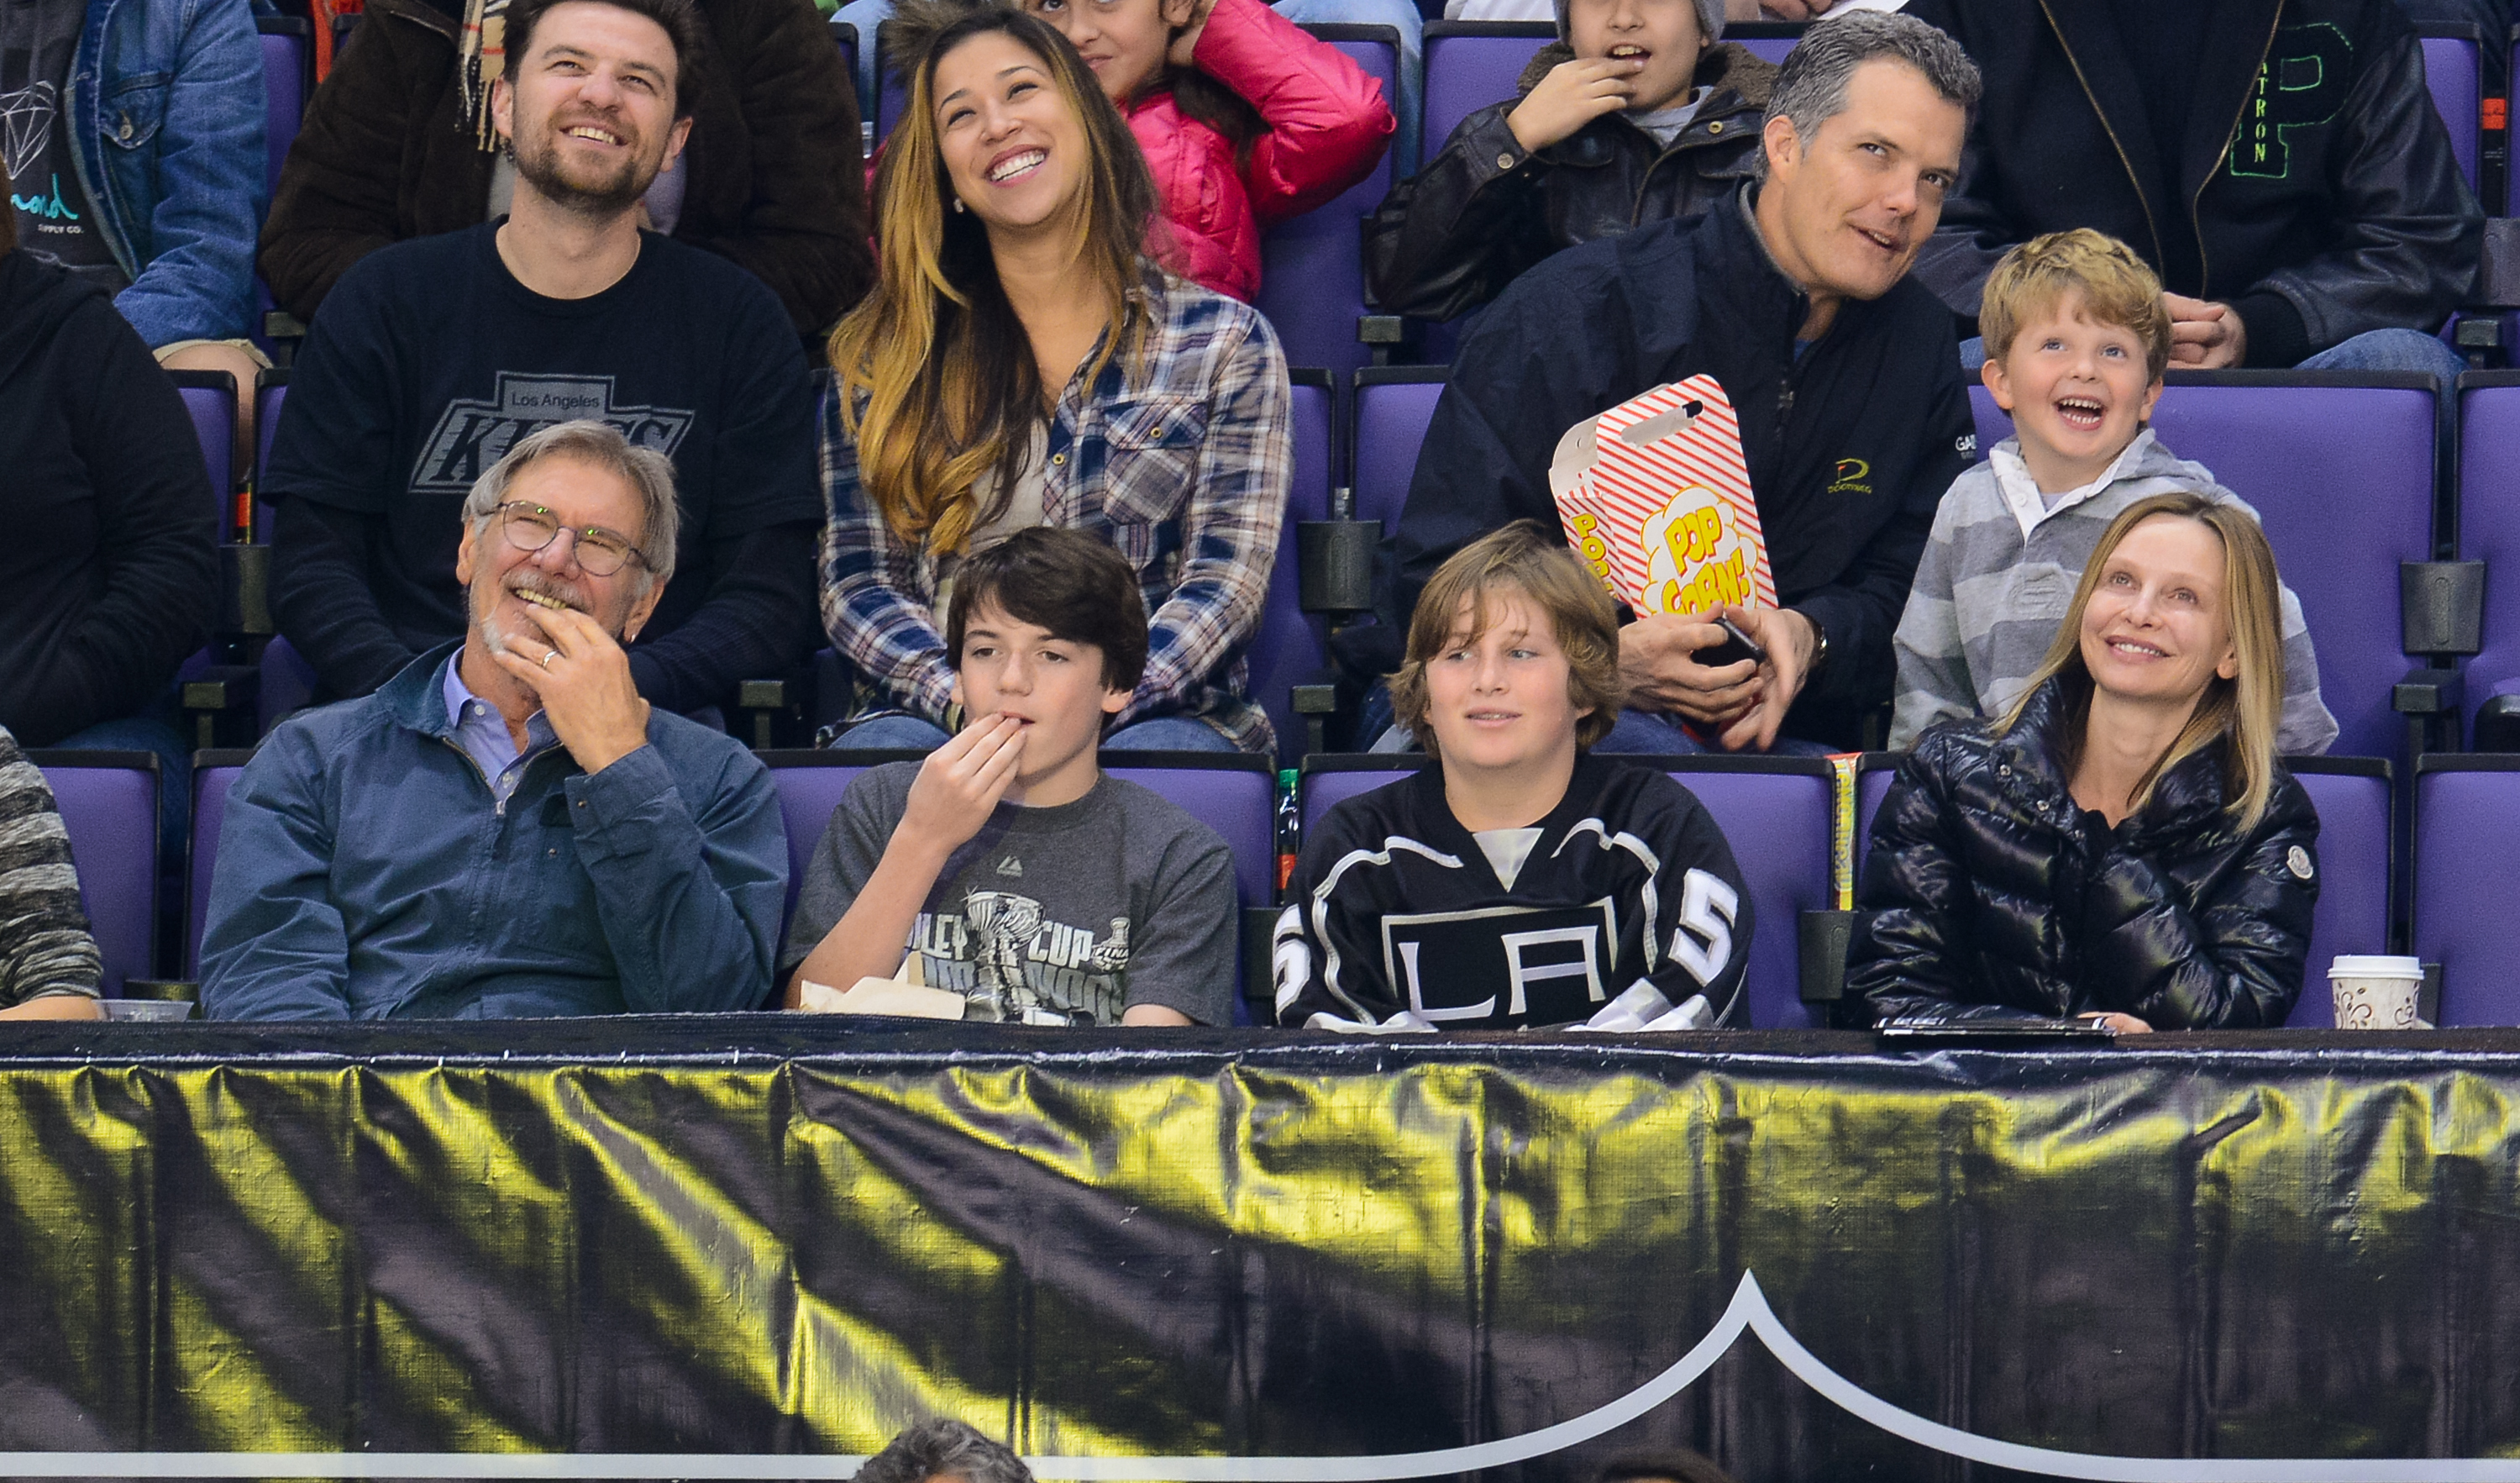 Harrison Ford, Calista Flockhart, and their son, Liam, at Staples Center on March 1, 2014 | Source: Getty Images